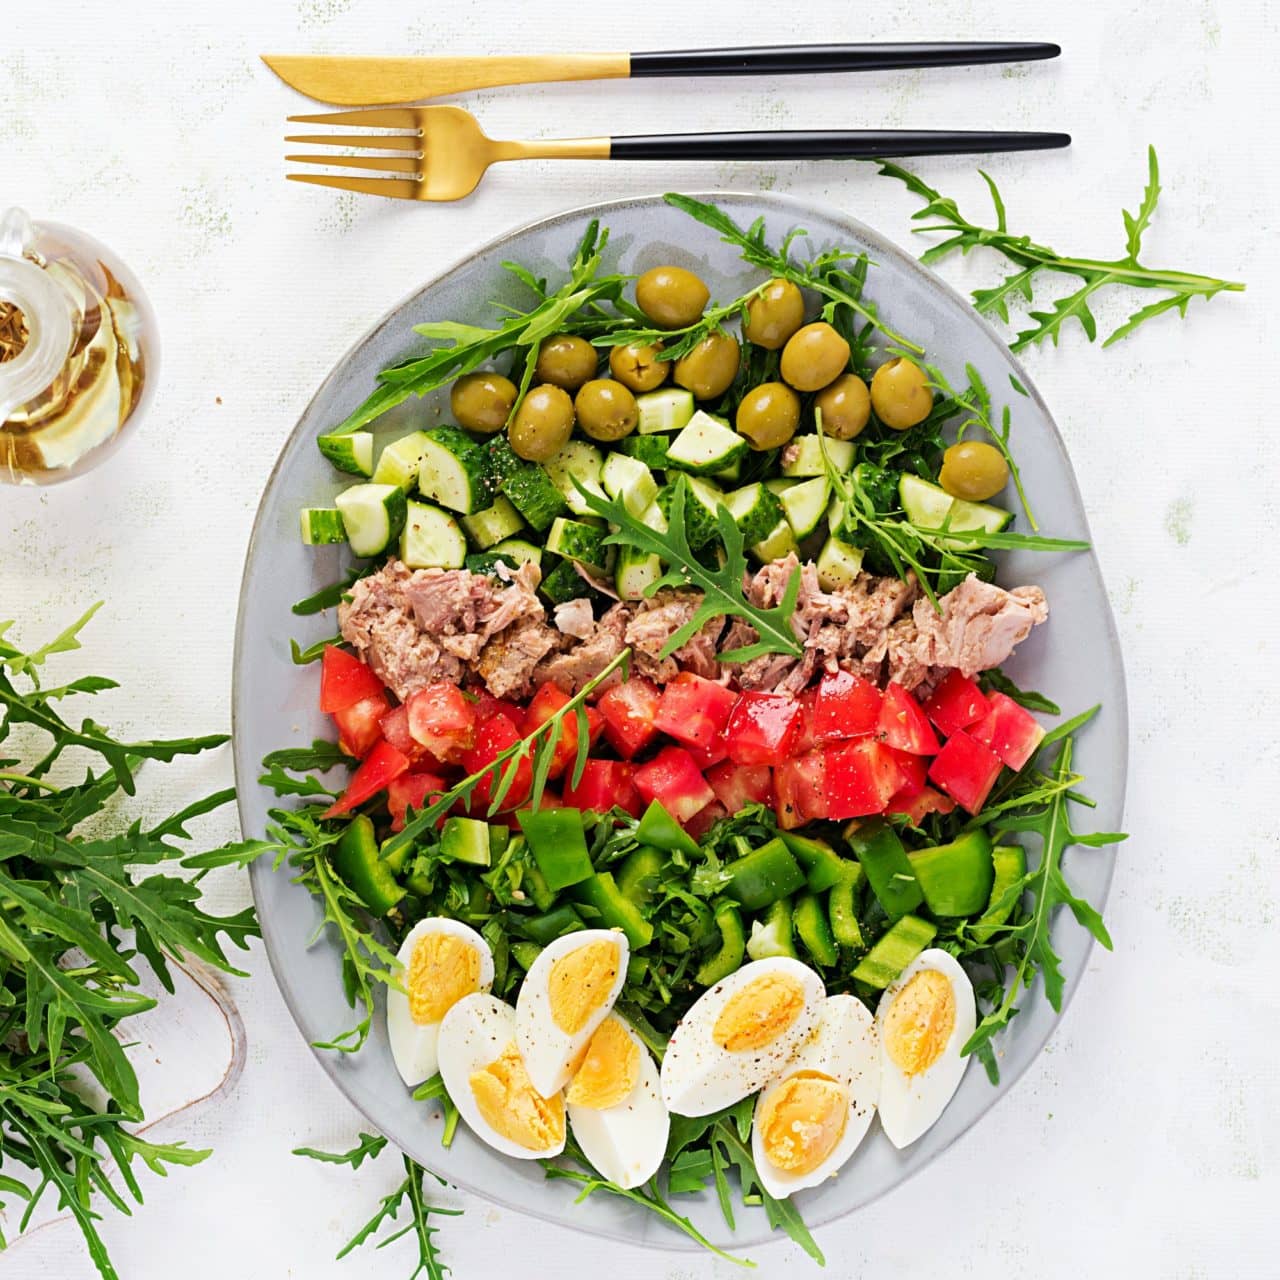 Healthy food. Tuna fish salad with eggs, cucumber, tomatoes, olives